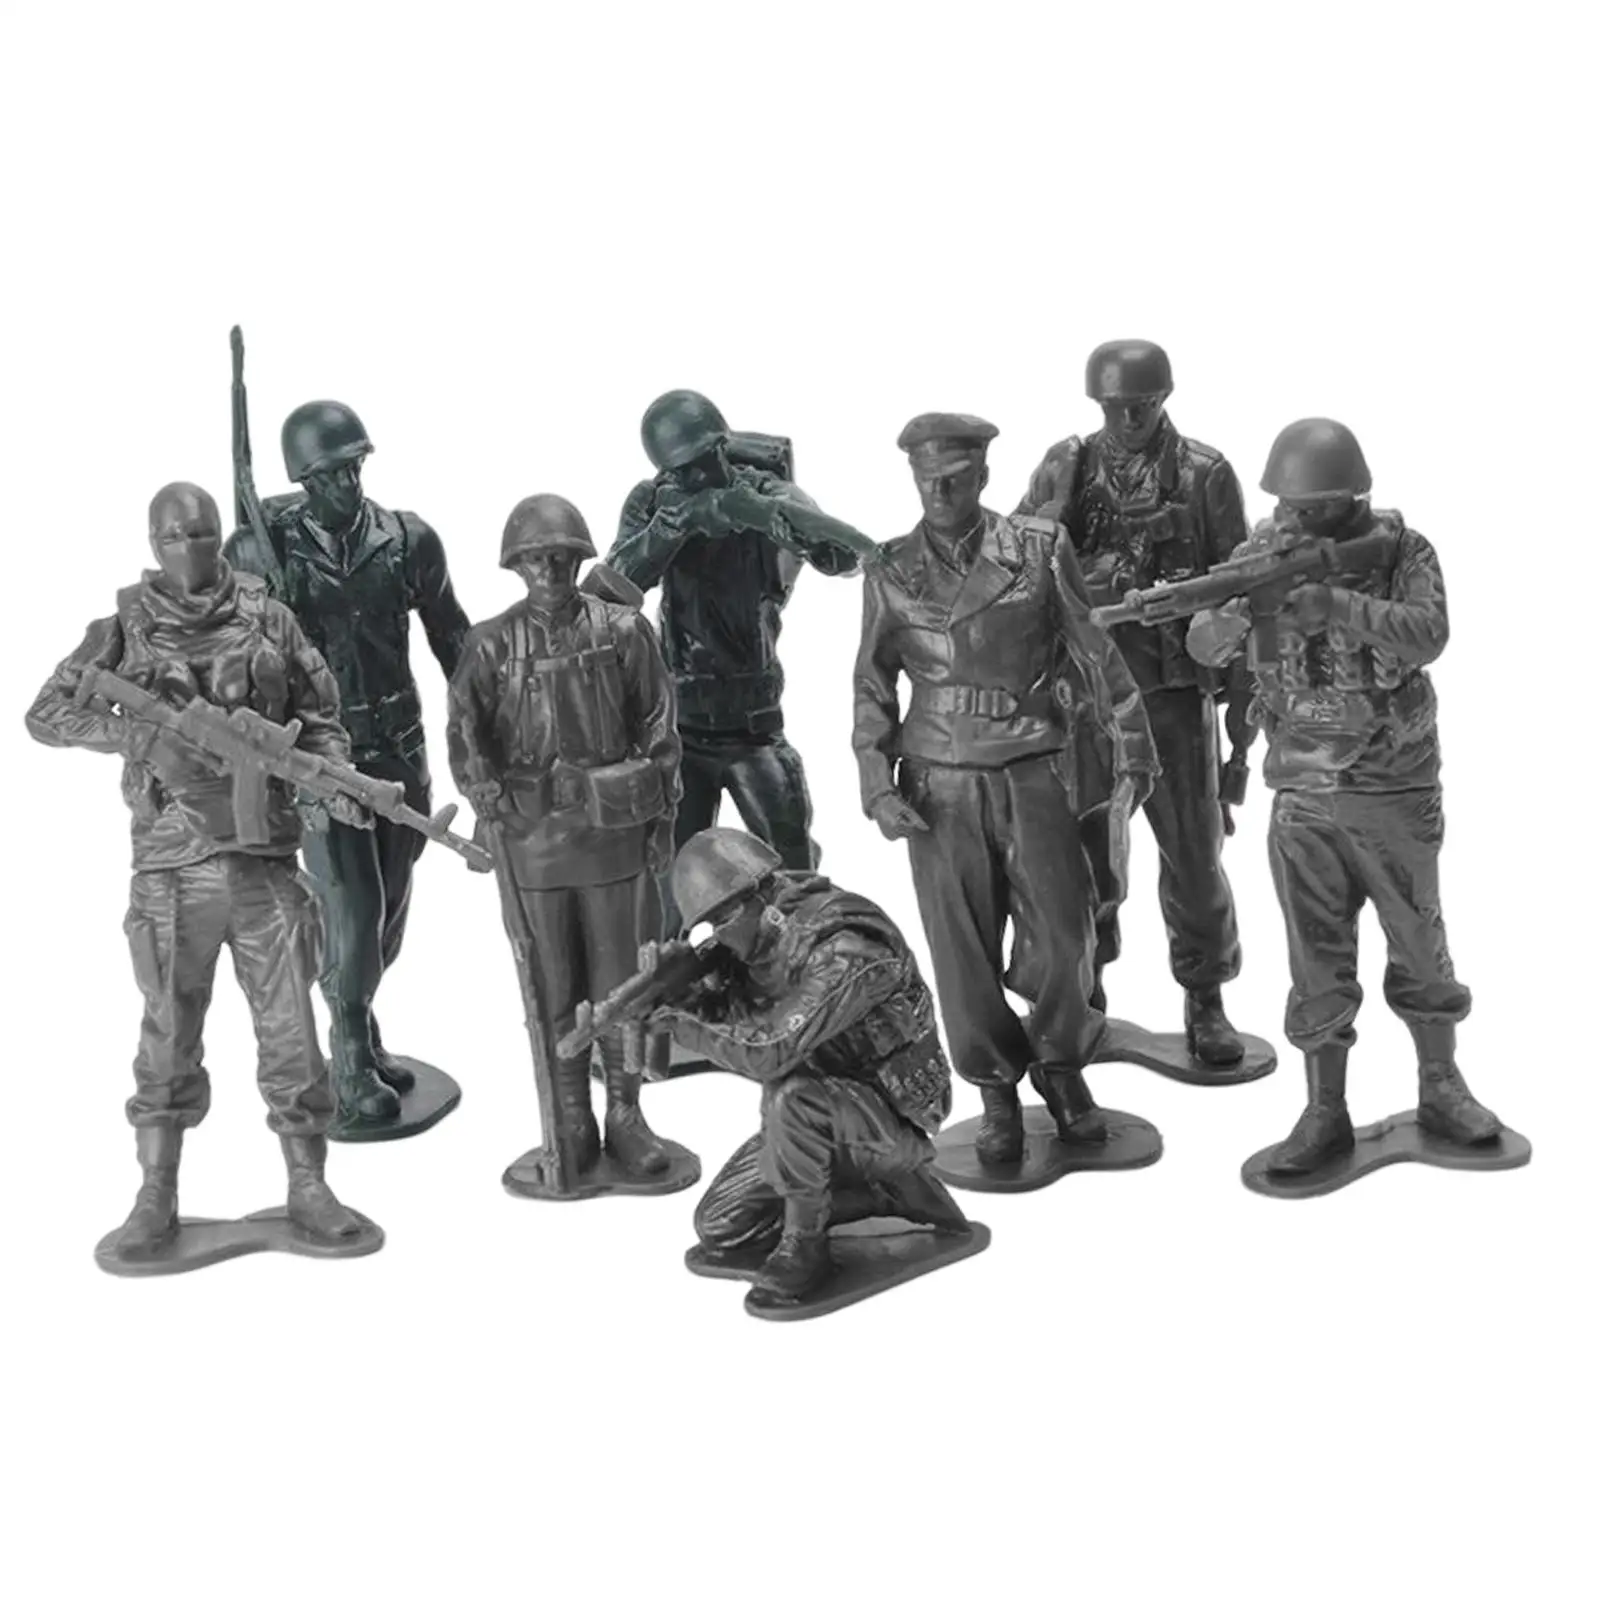 8 Pieces 1:18 Scale Action Figure Toy Soldiers Playset Party Supplies Scenery Layout Soldiers Figurines Model for Children Kids